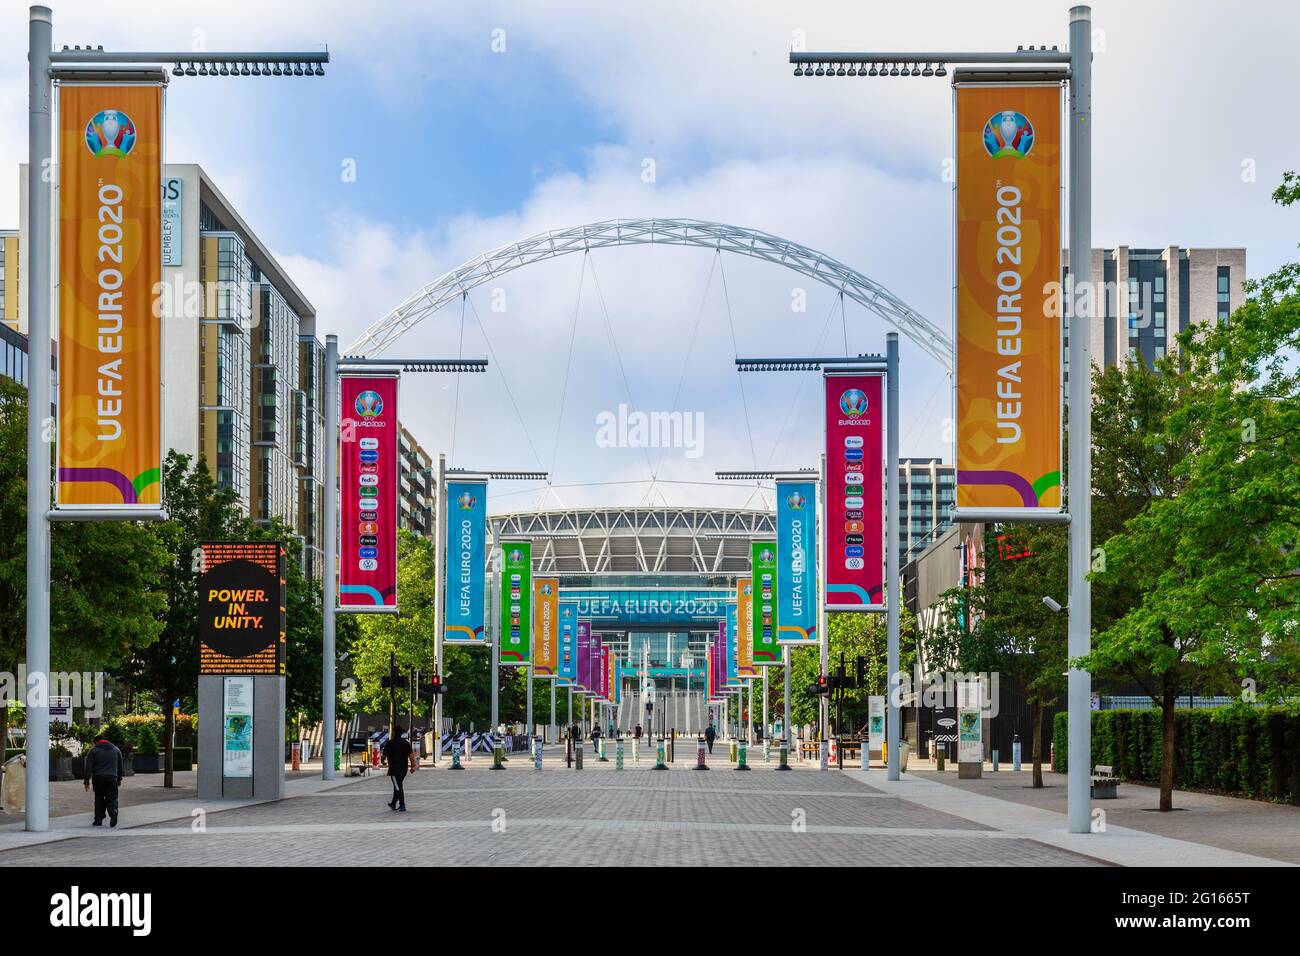 Wembley Stadium, Wembley Park, UK. 5th June 2021. Wembley continues its preparations for the UEFA European Football Championship with the flagpoles along Olympic Way changed to brightly coloured Euro 2020 banners.  The tournament starts in 6 days, 11th June 2021. It was postponed by a year as the Coronavirus pandemic hit worldwide in 2020.  Amanda Rose/Alamy Live News Stock Photo